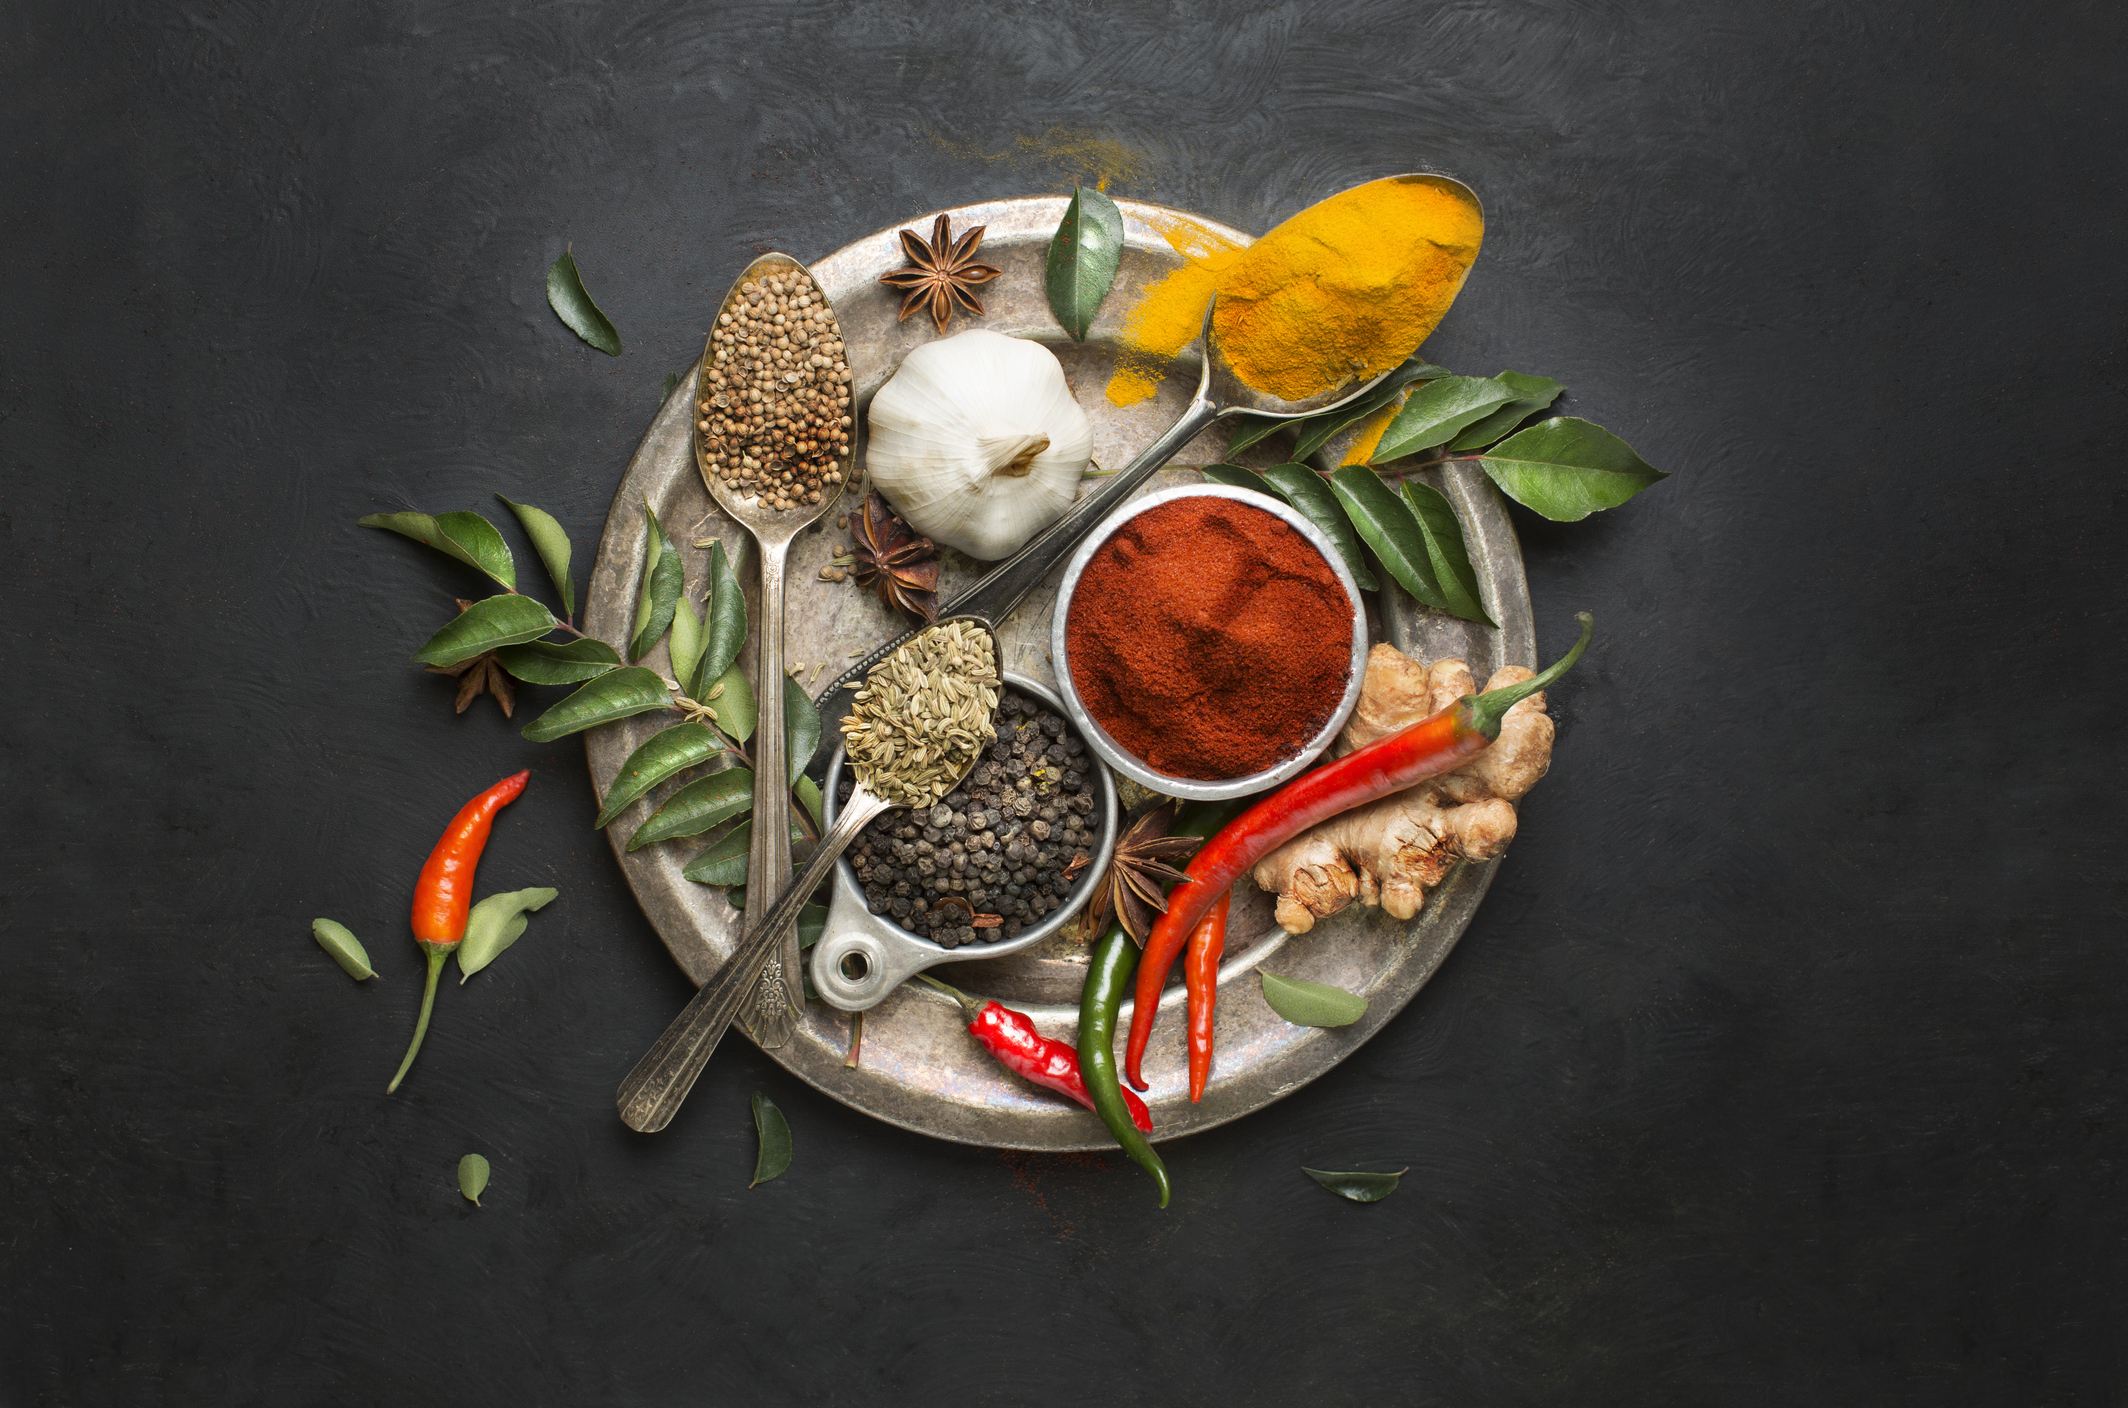 Flat lay overhead view herb and spices on textured black background.